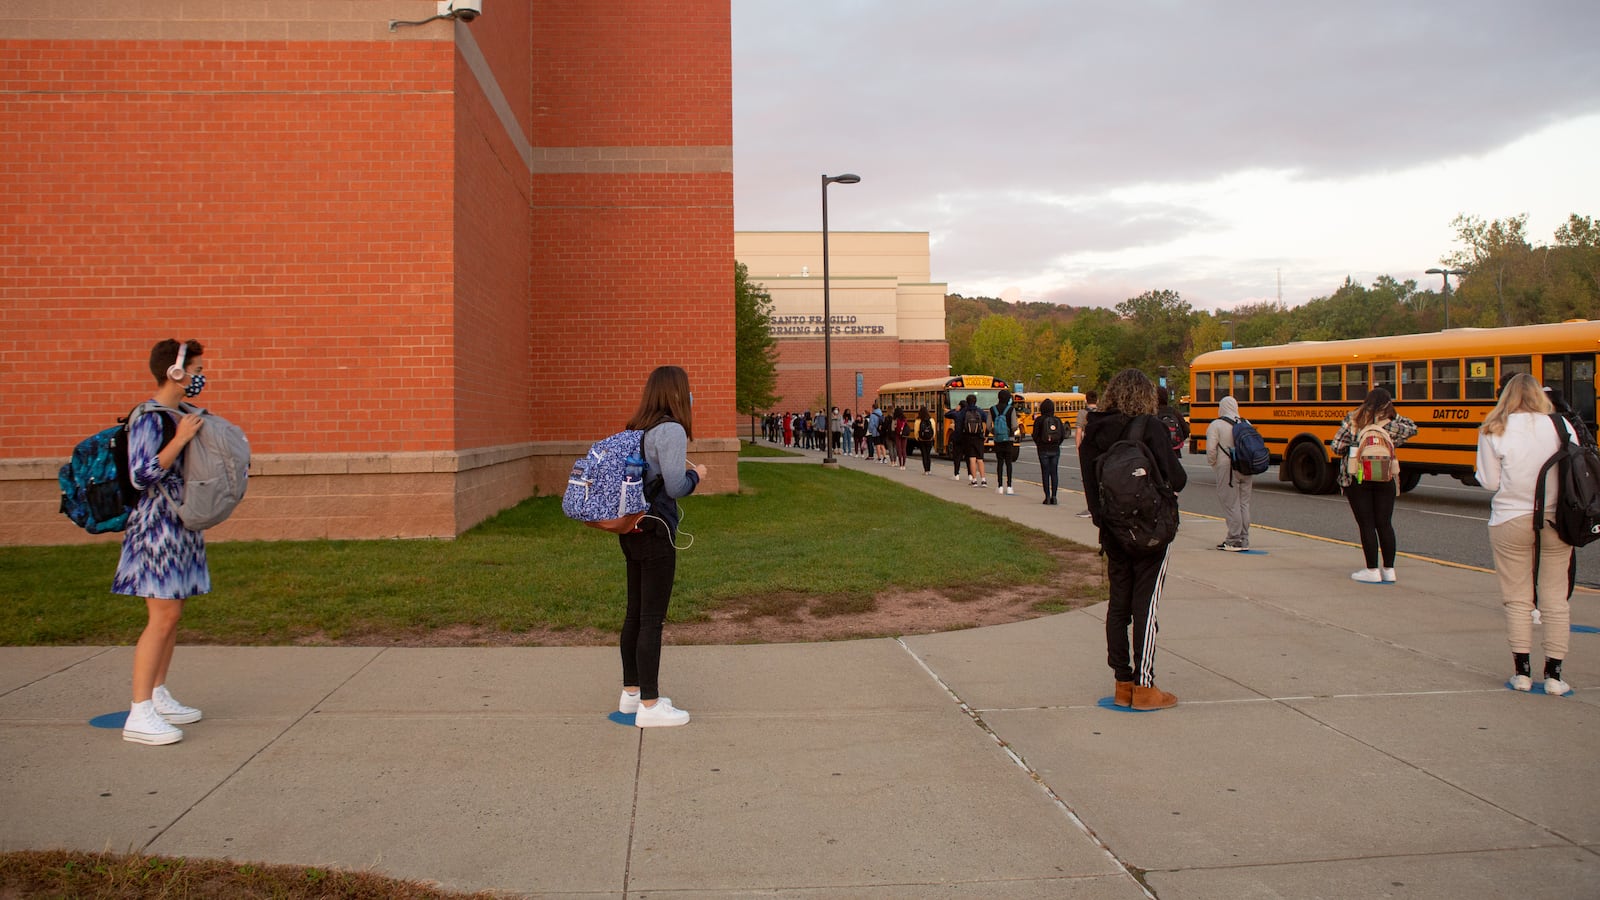 Students line up on socially distanced dots painted on the sidewalk to wait their turn to be scanned by a temperature screener before classes at Middletown High School.